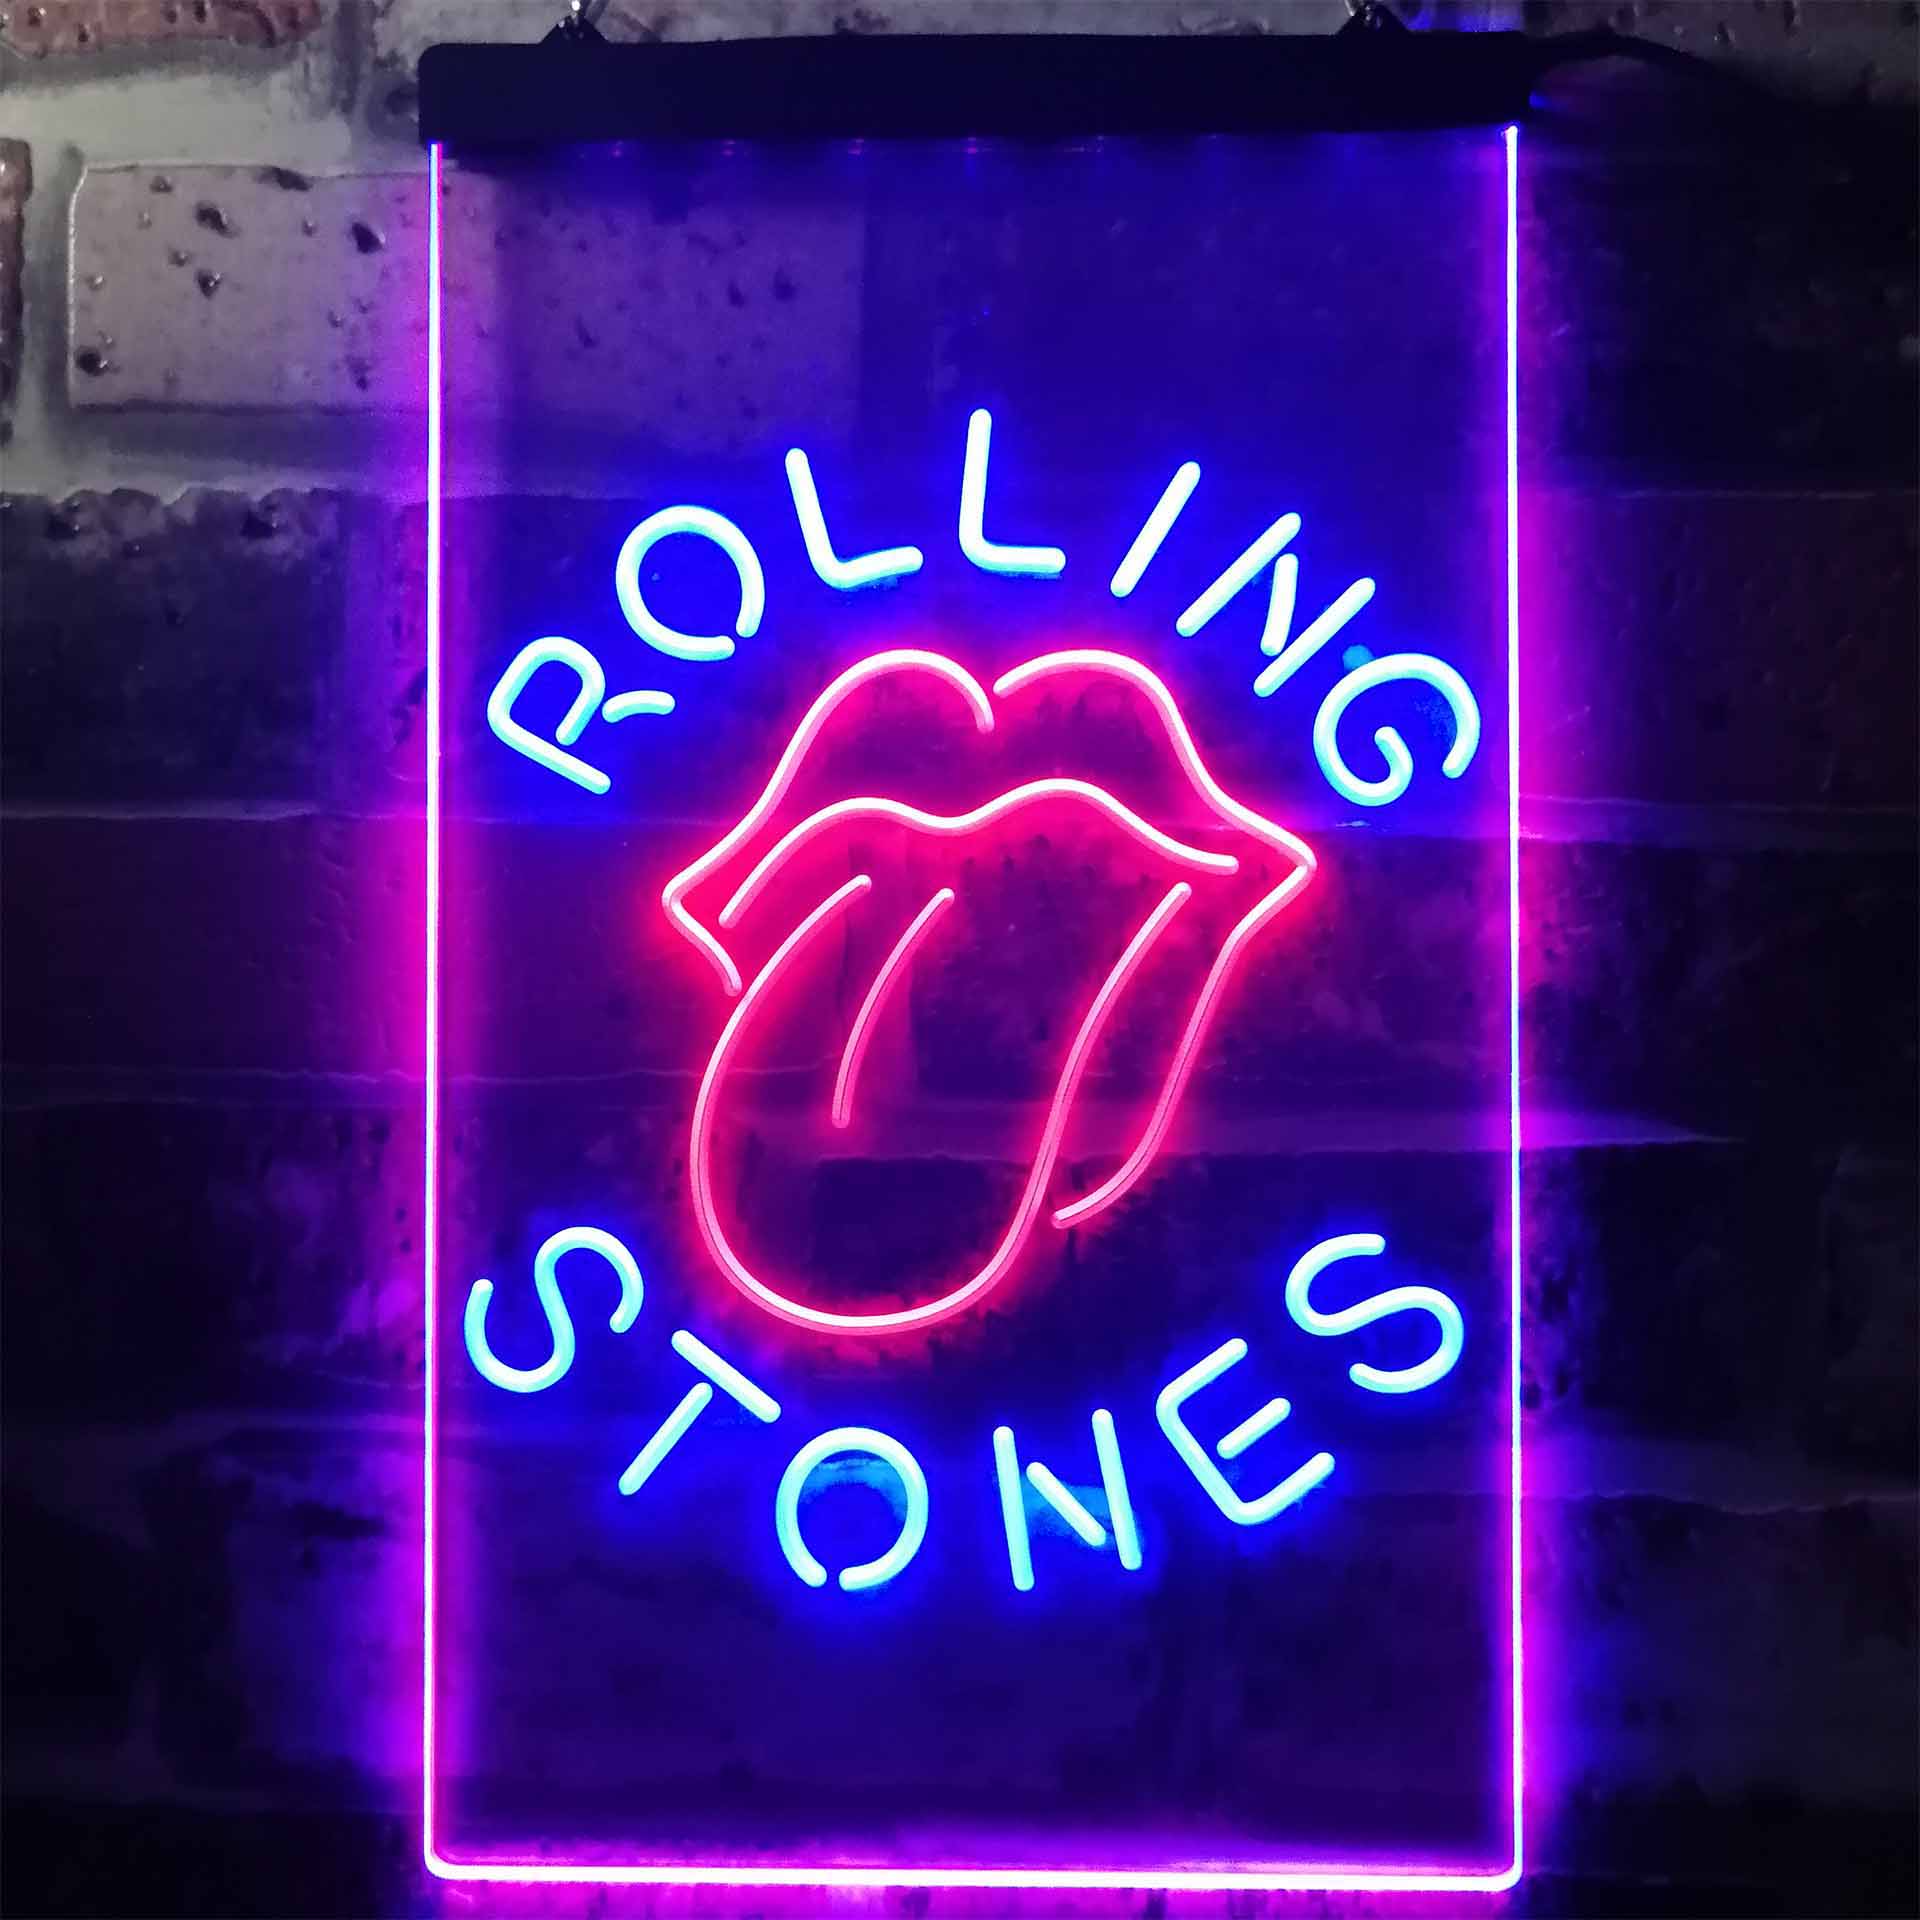 Rolling Stones Band Neon-Like LED Sign